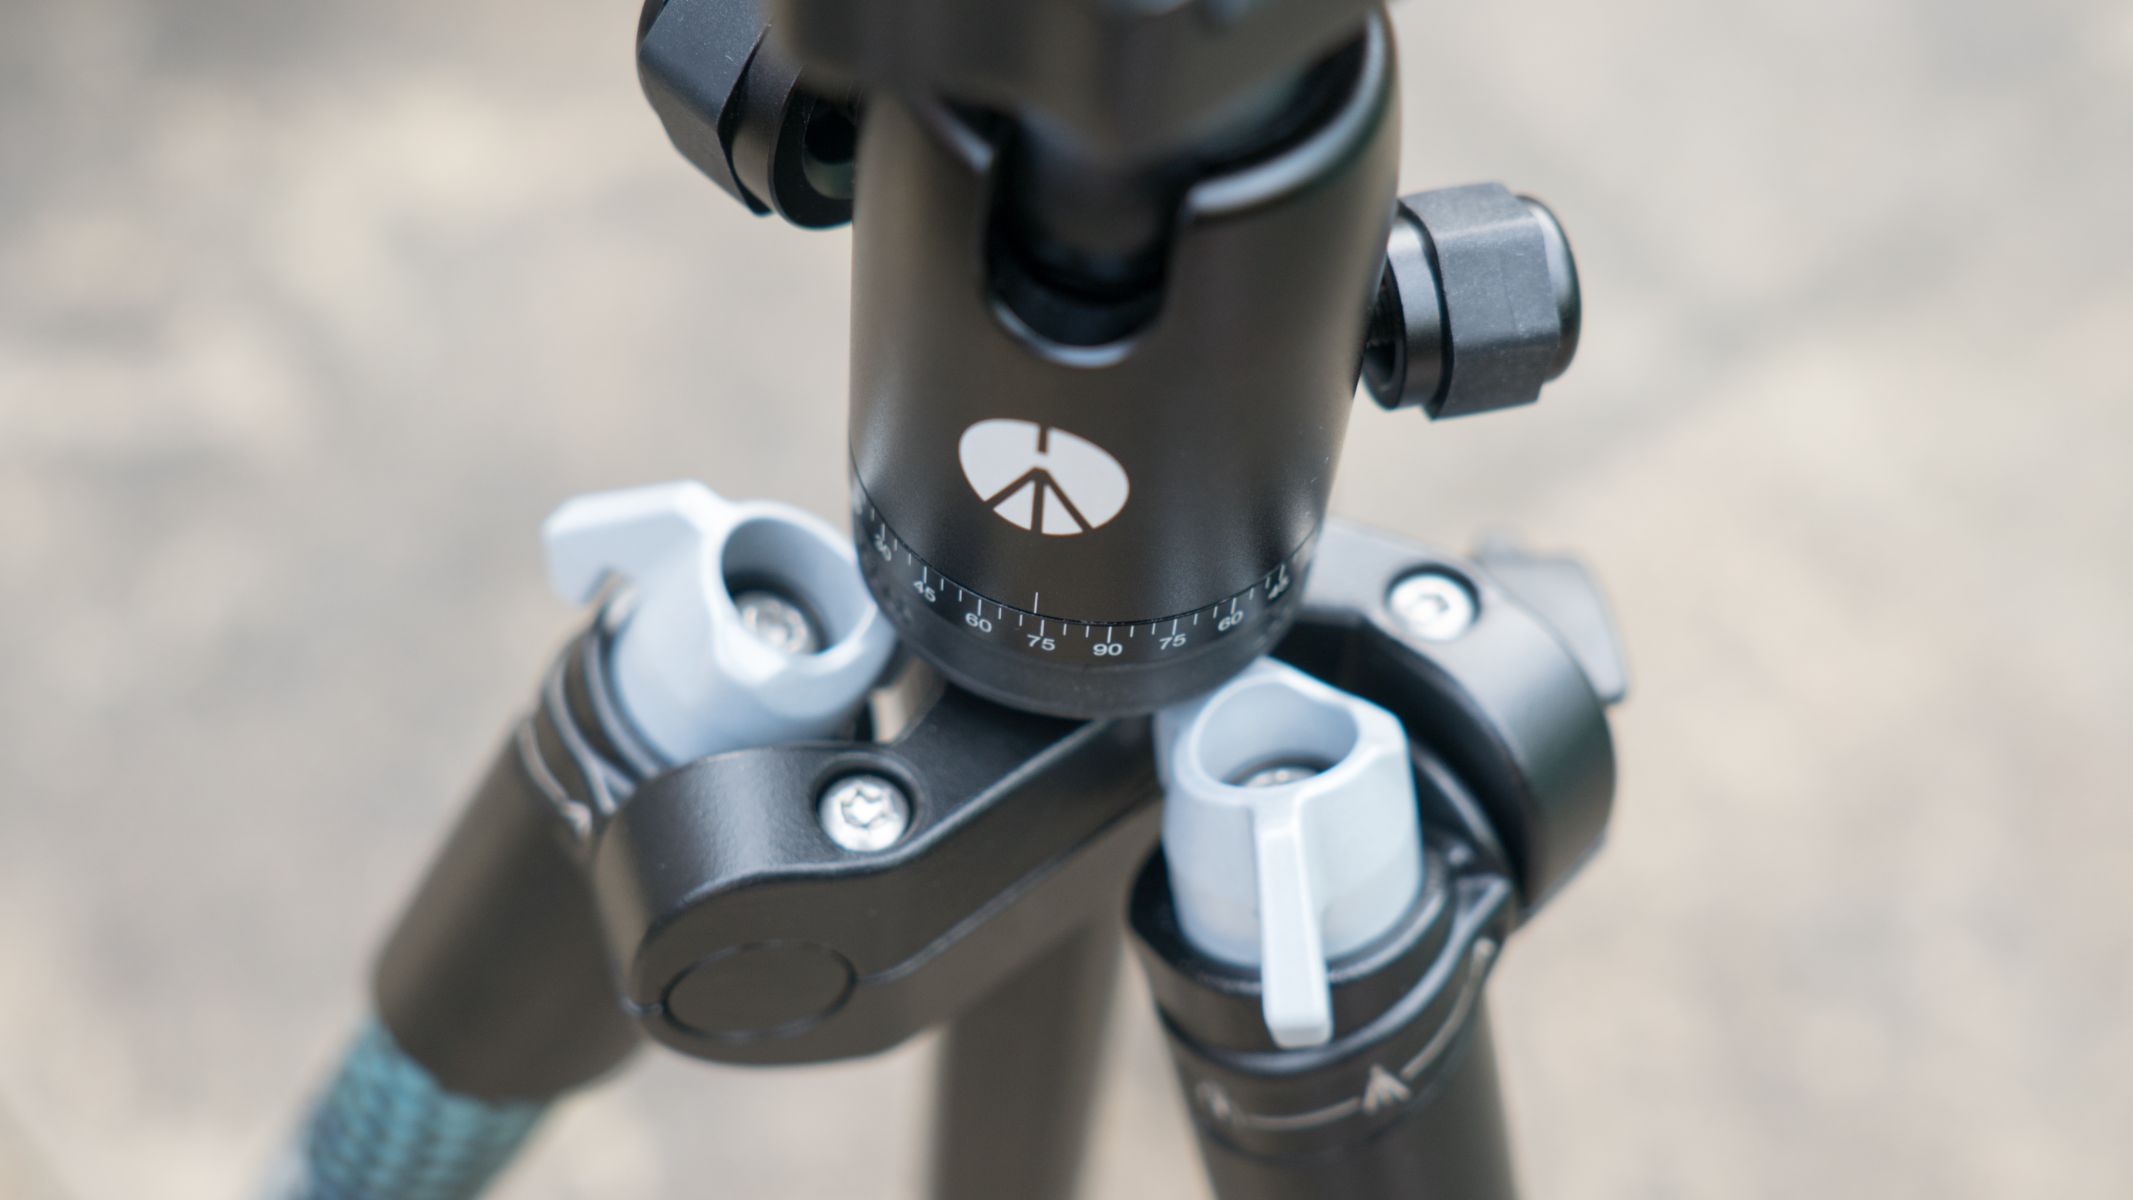 A close view of the locking levers on the tripod legs